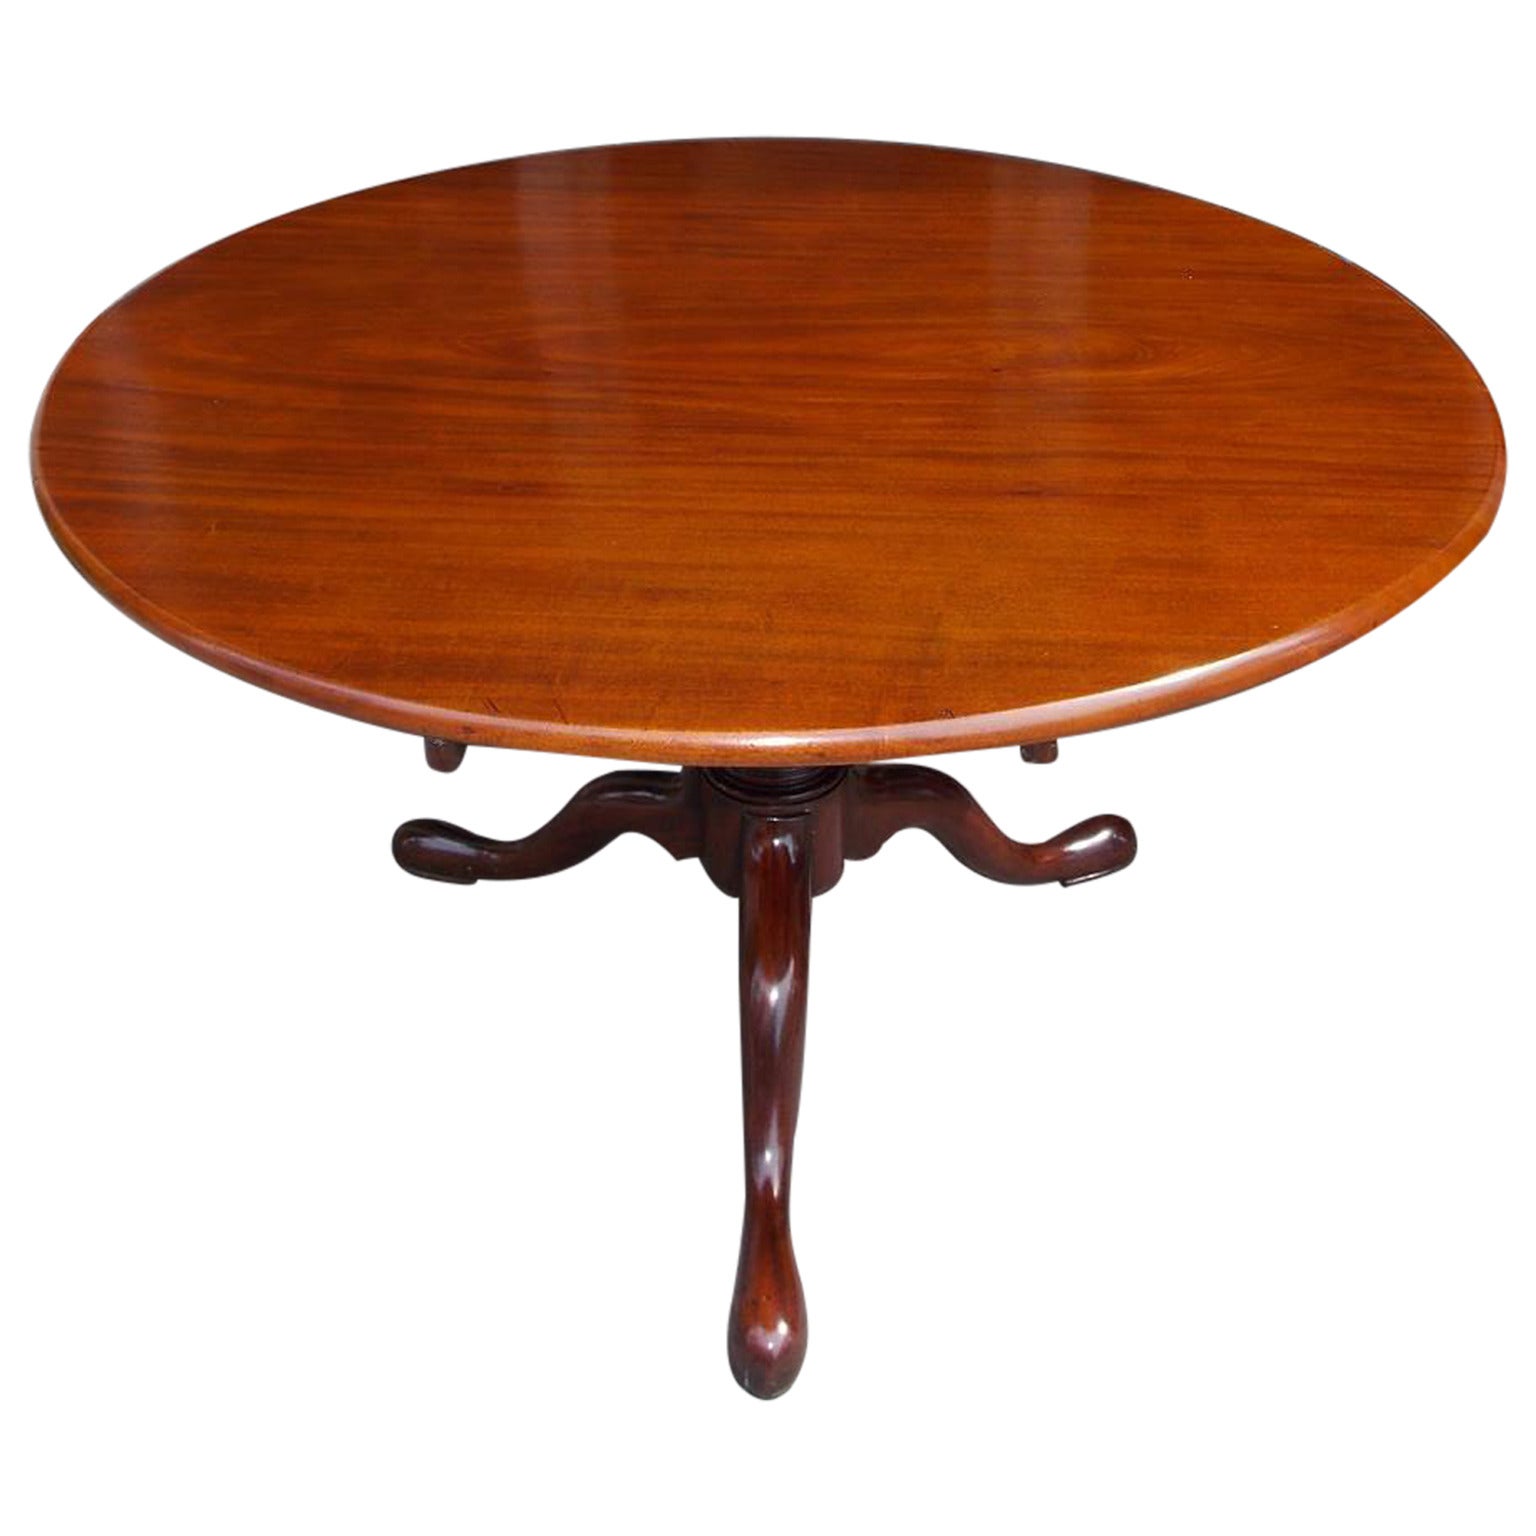 English Chippendale Mahogany Center Table With One Board Top.  Circa 1760